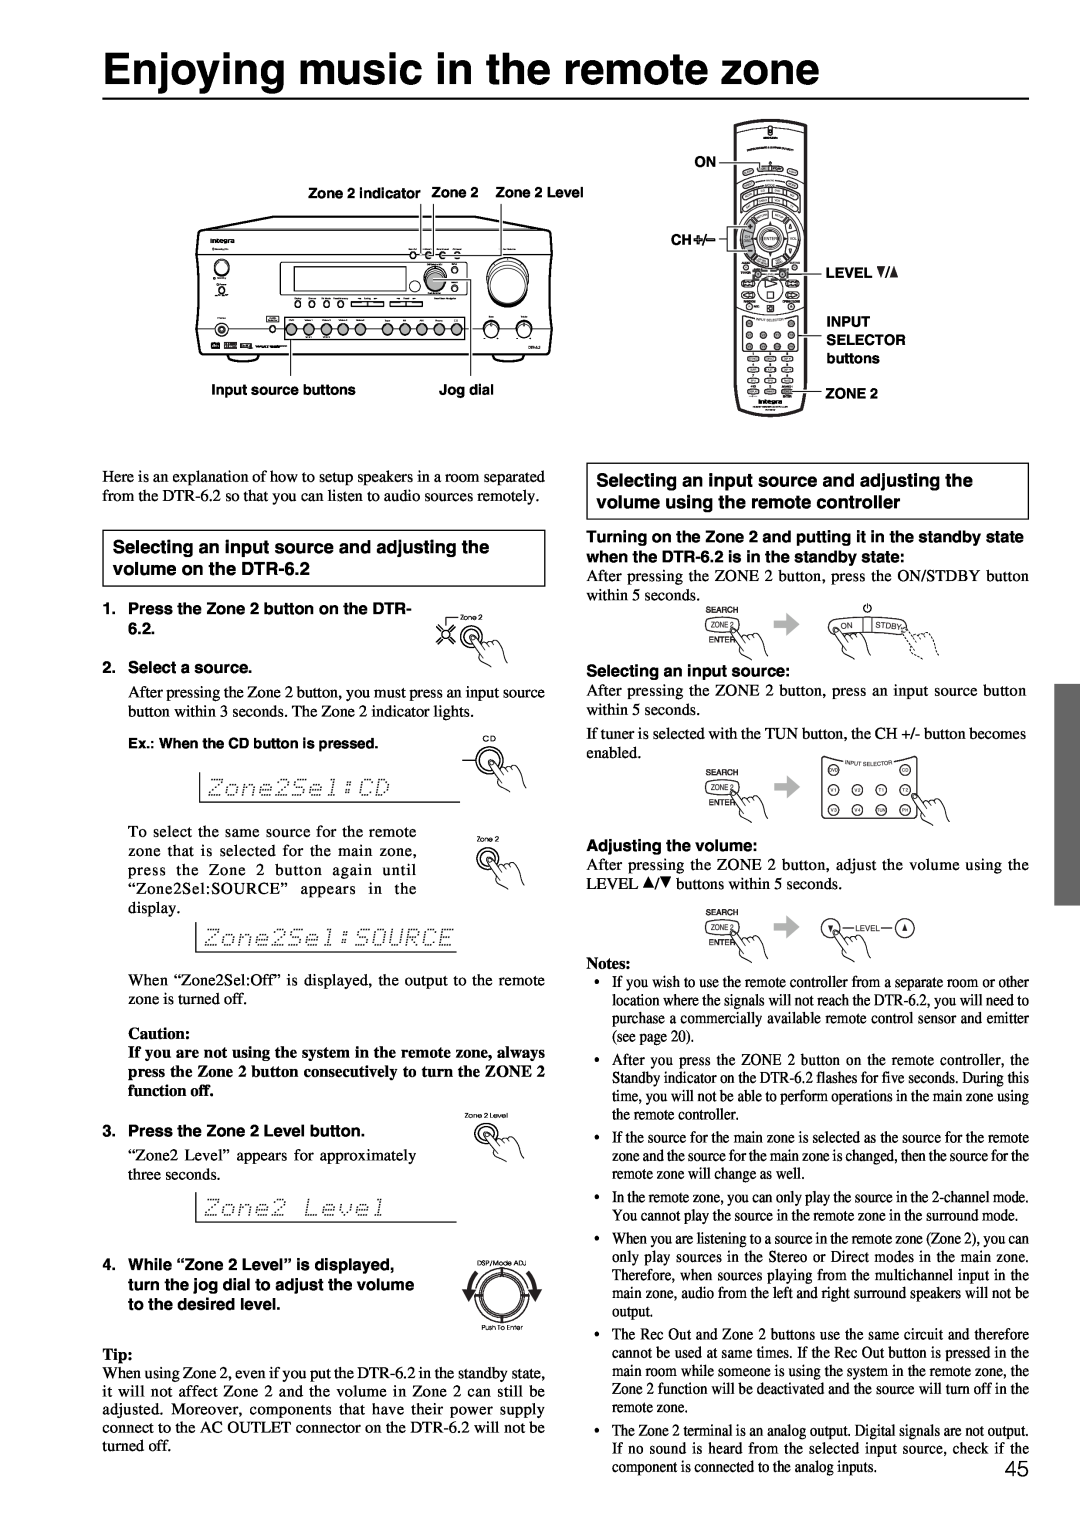 Integra DTR-6.2 instruction manual Enjoying music in the remote zone 